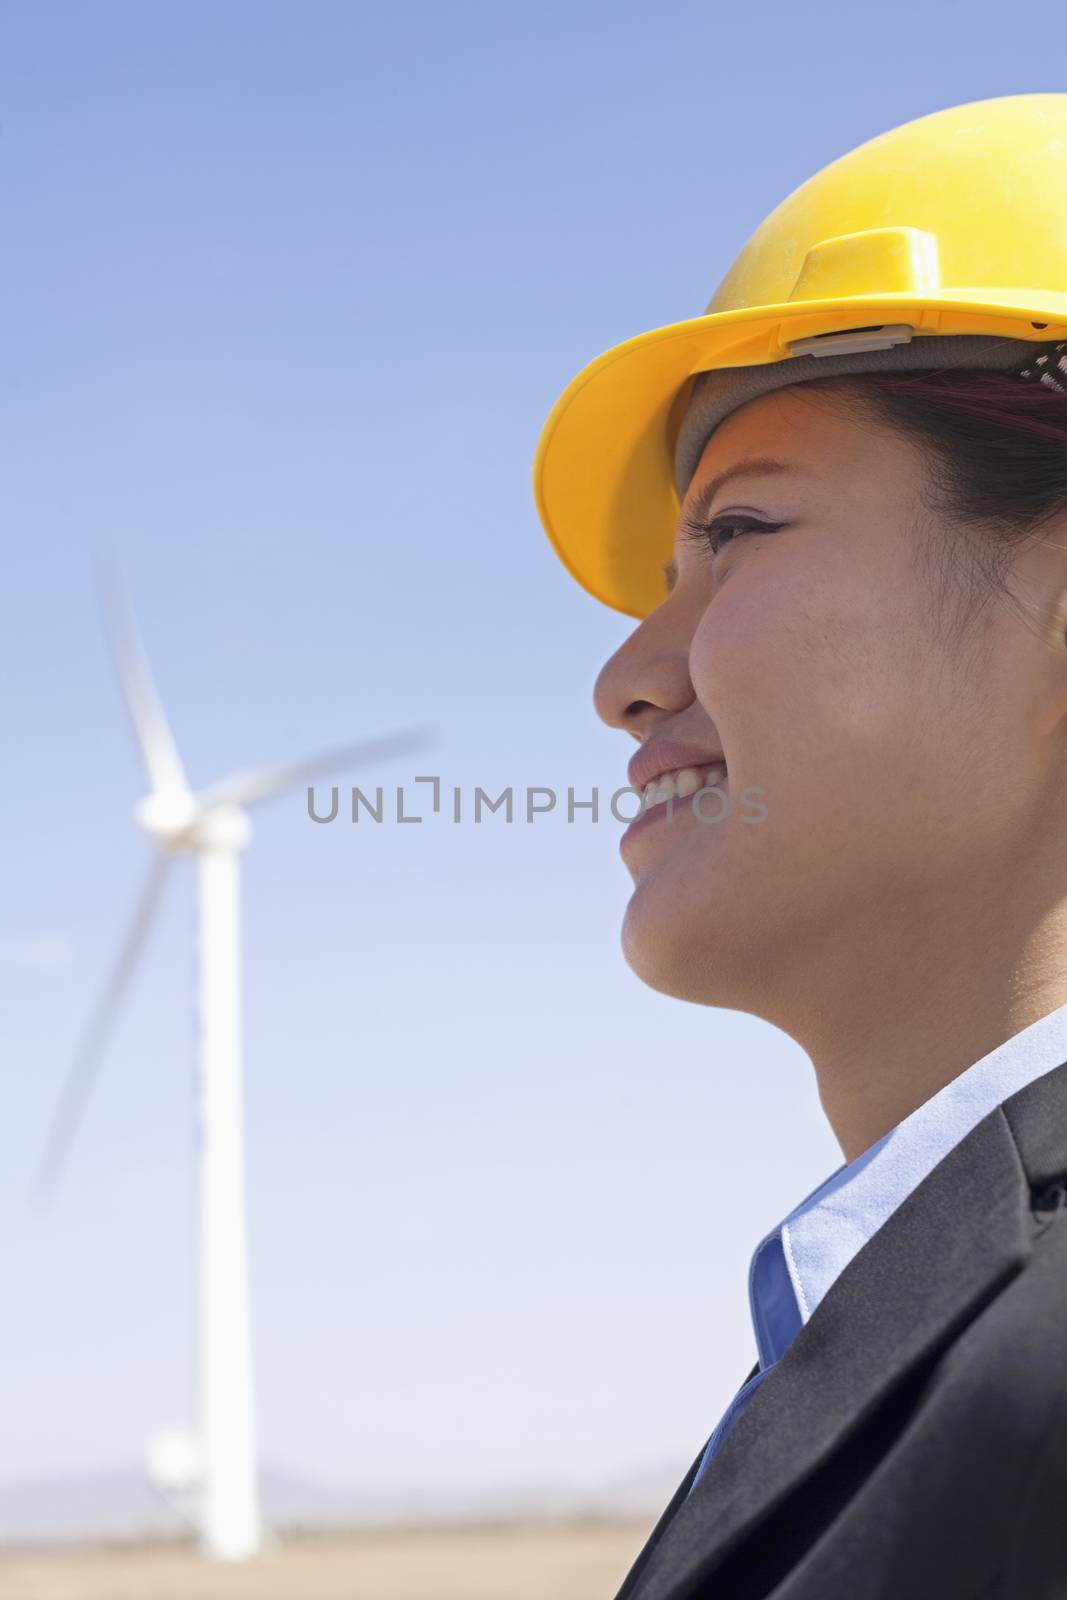 Portrait of young smiling female engineer checking wind turbines on site, side view